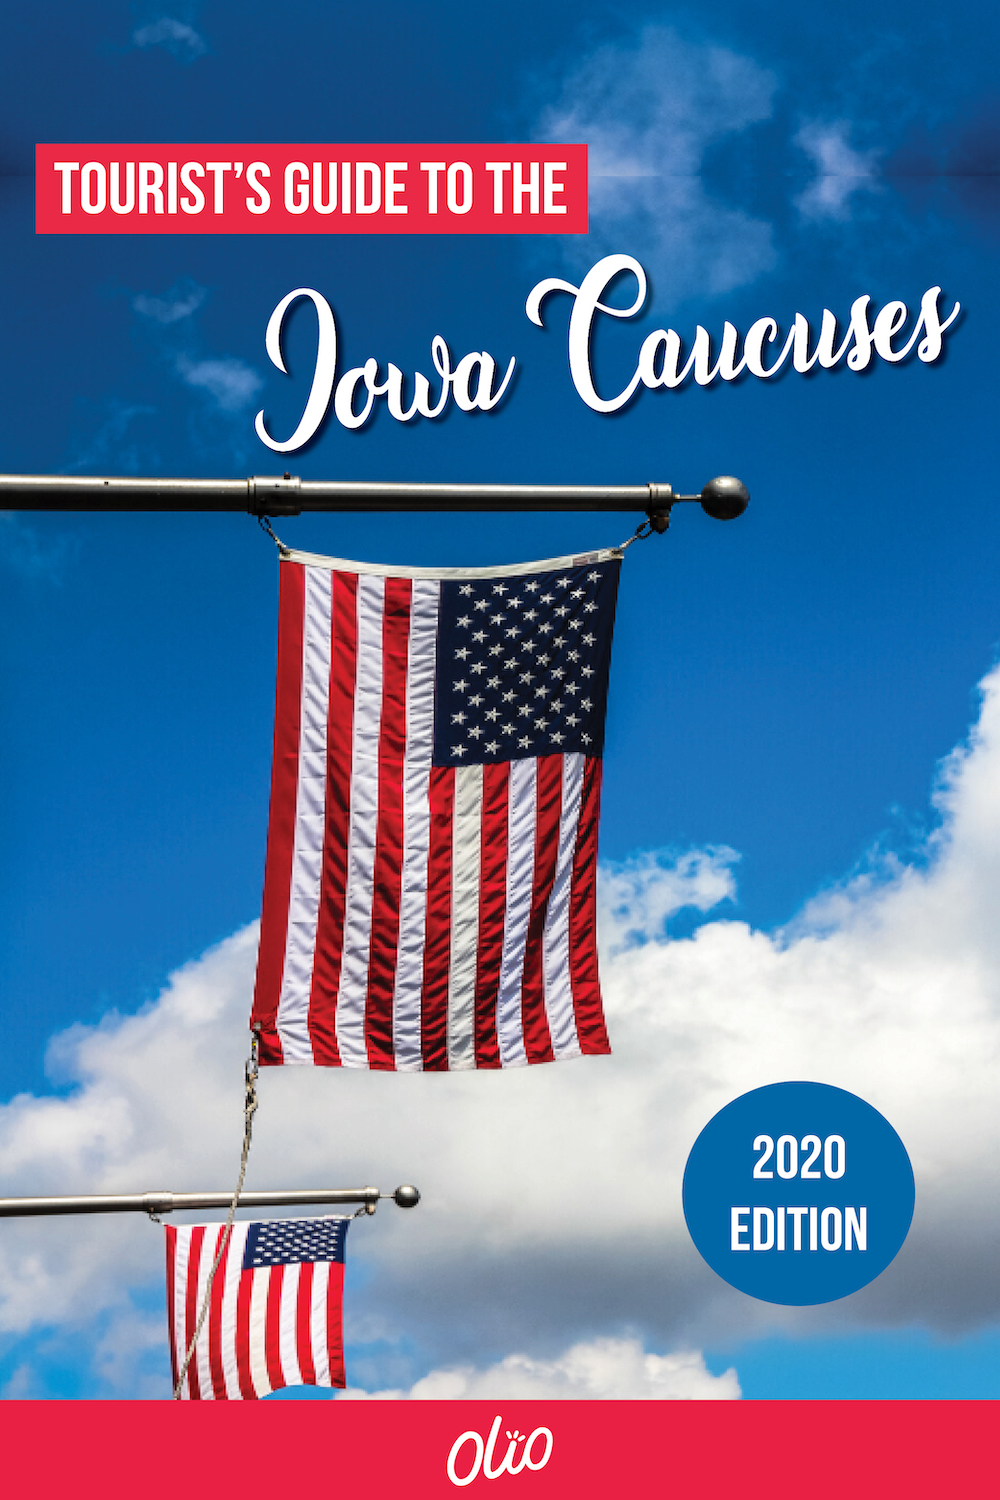 Whether you're a politics junky or interested in meeting the potential next president of the United States, there are lots of reasons to come to Des Moines during the Iowa Caucuses! This Iowa caucus tourist guide gives an overview of the caucuses, things to do in Des Moines, where you might spot a candidate or two, and more. Experience Iowa's first-in-the-nation politics firsthand during the 2020 caucuses! #Iowa #IowaCaucus #2020Election